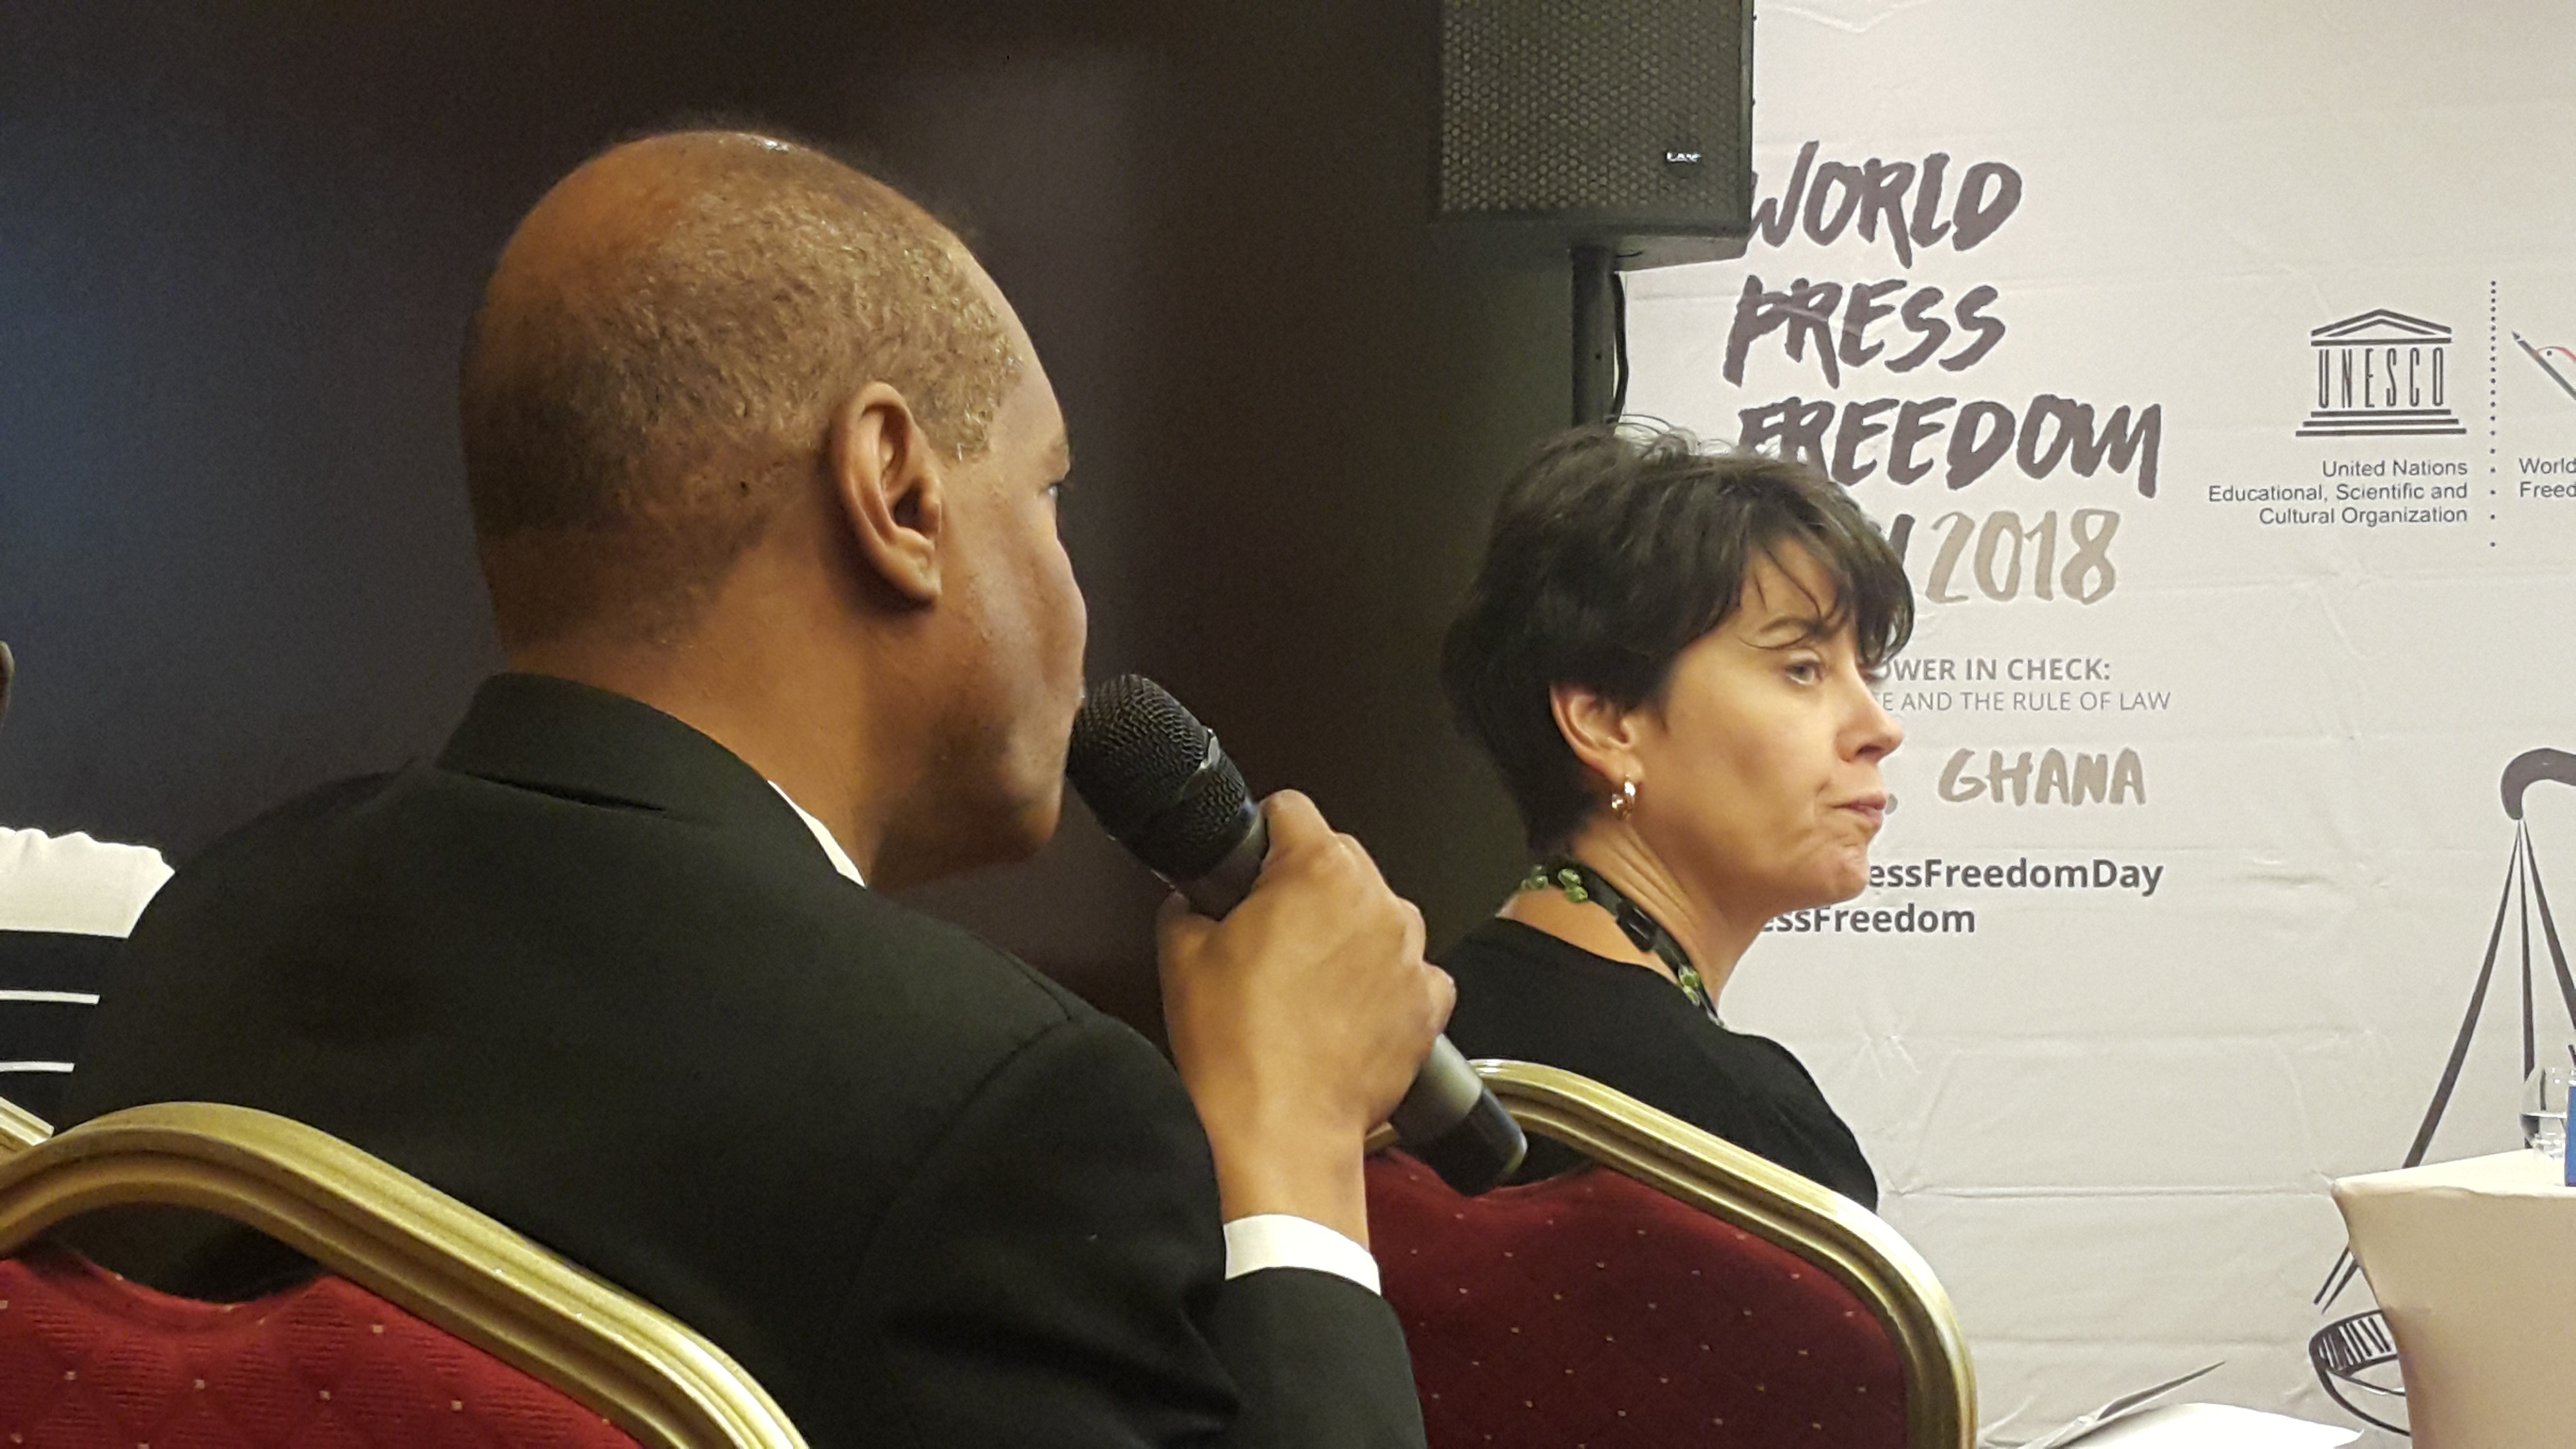 World Press Freedom Day Reshaping policies to end attacks on media